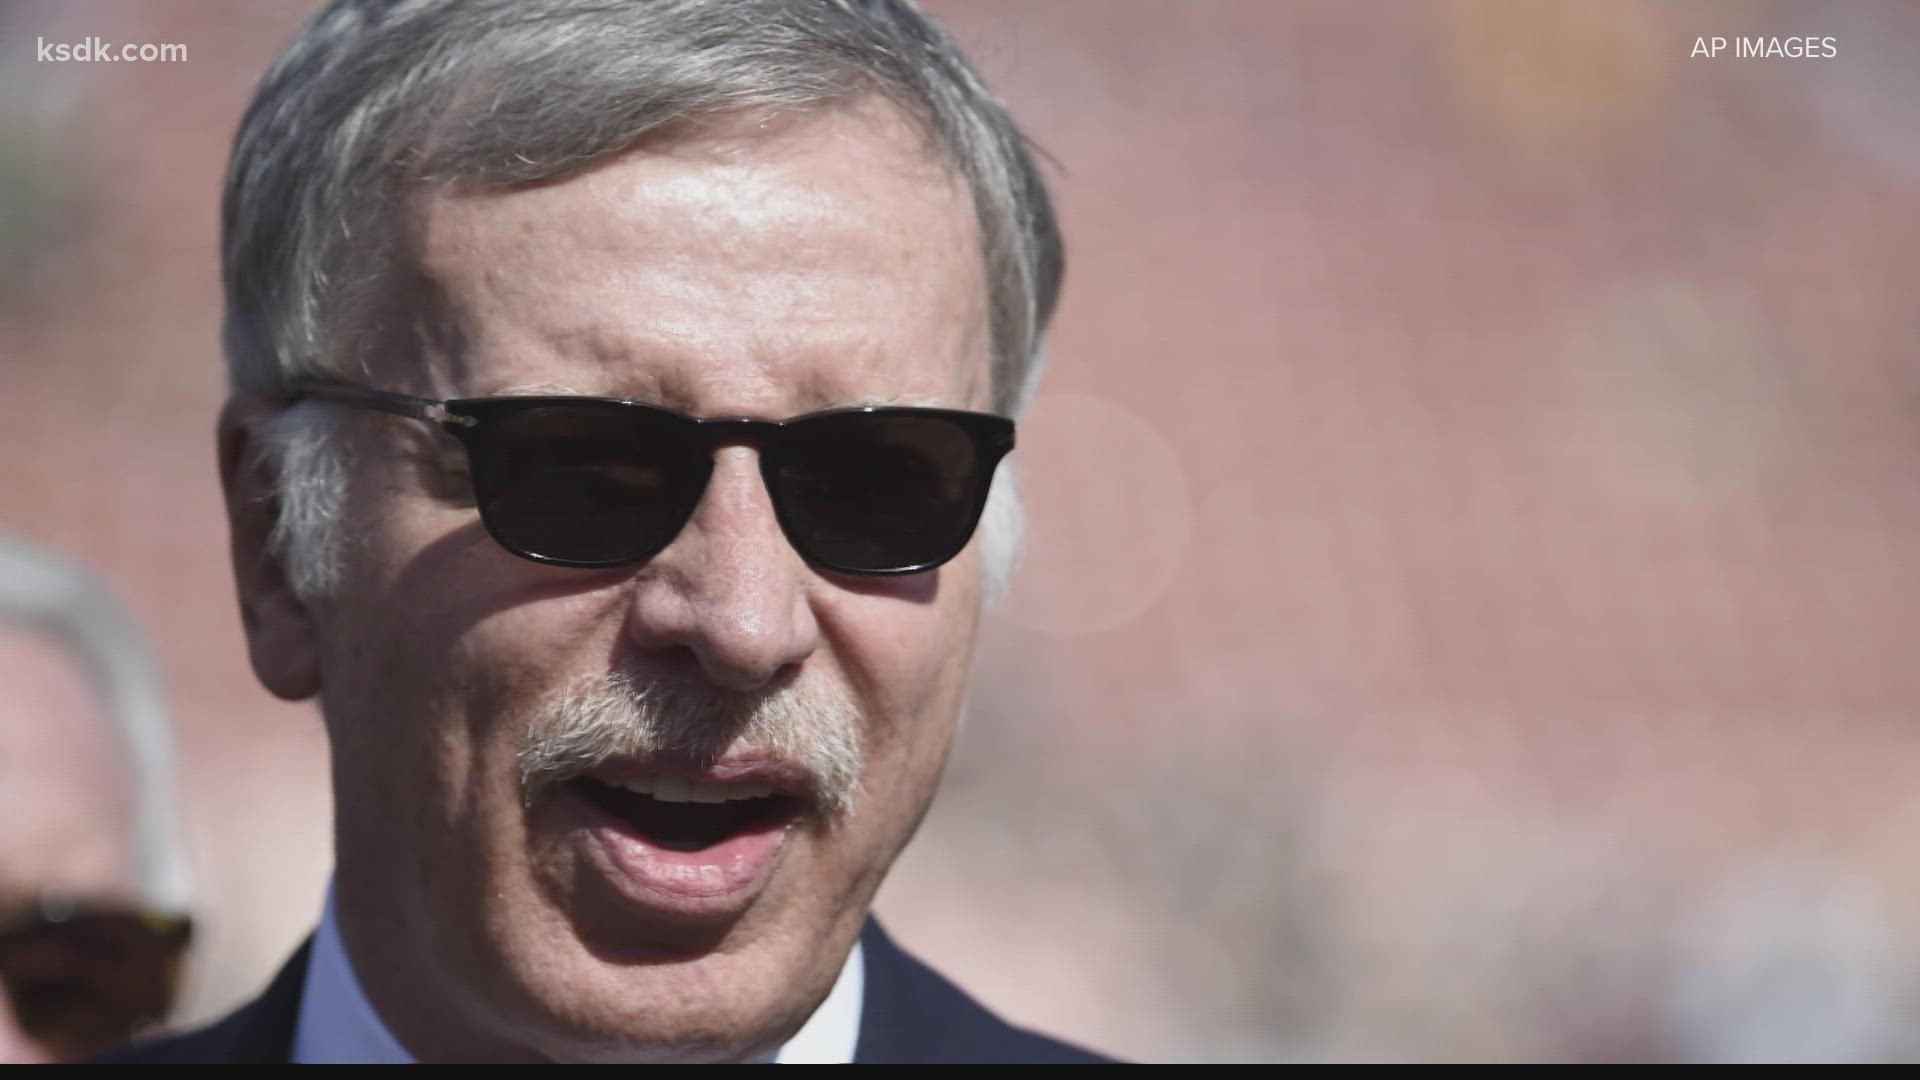 ESPN's Seth Wickersham reports Kroenke could be maneuvering to get out of footing the bill for the NFL's legal expenses